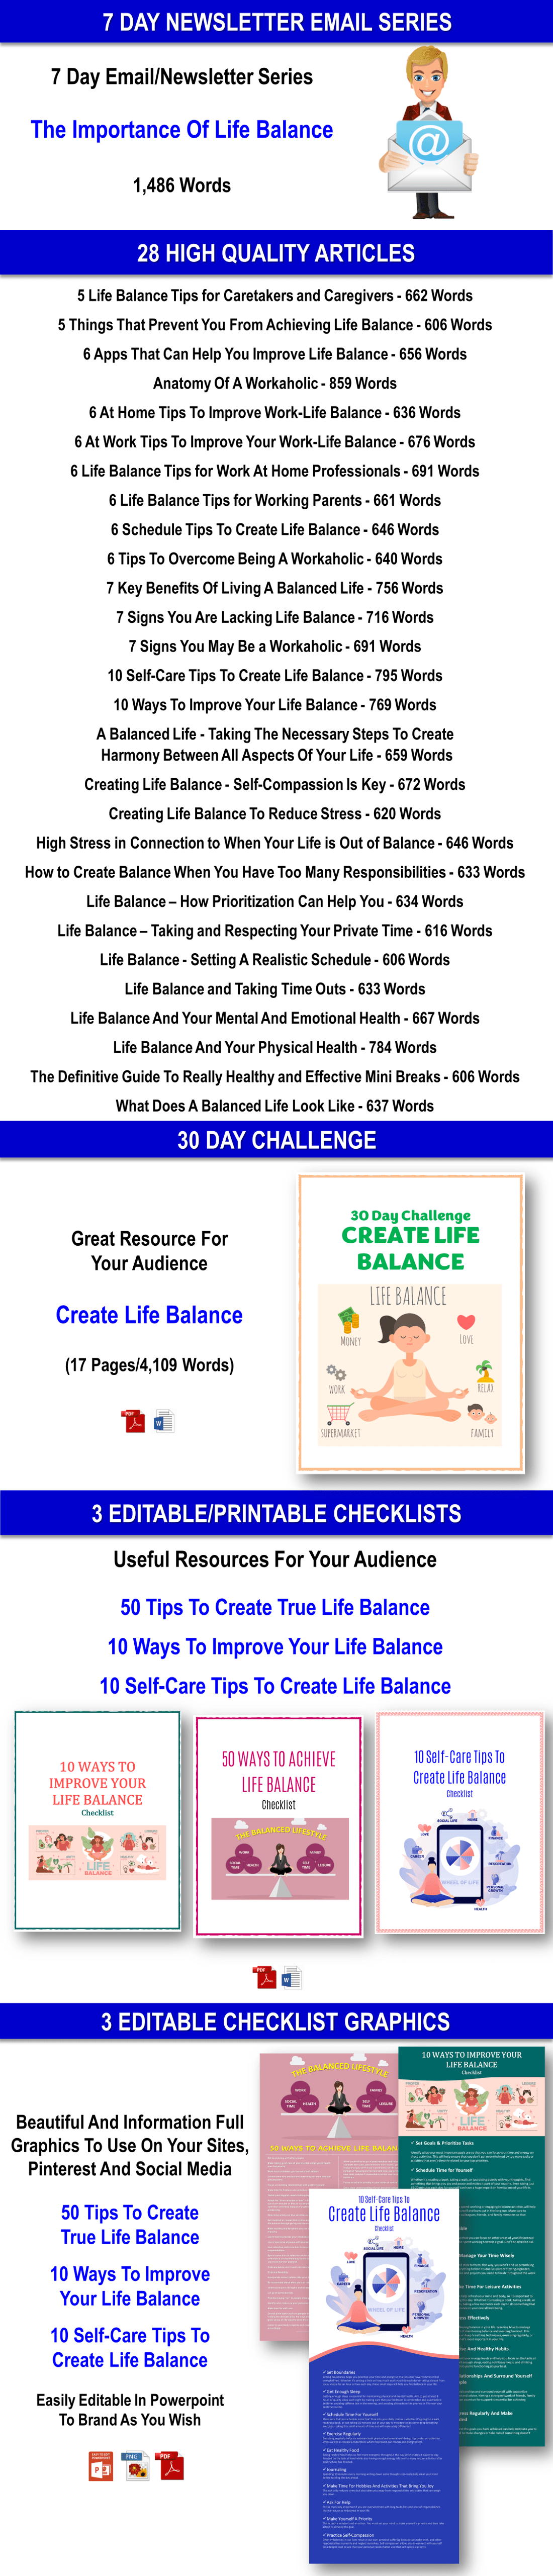 The Balanced Lifestyle - Create Harmony Between All Aspects Of Your Life Giant Content Pack PLR Rights